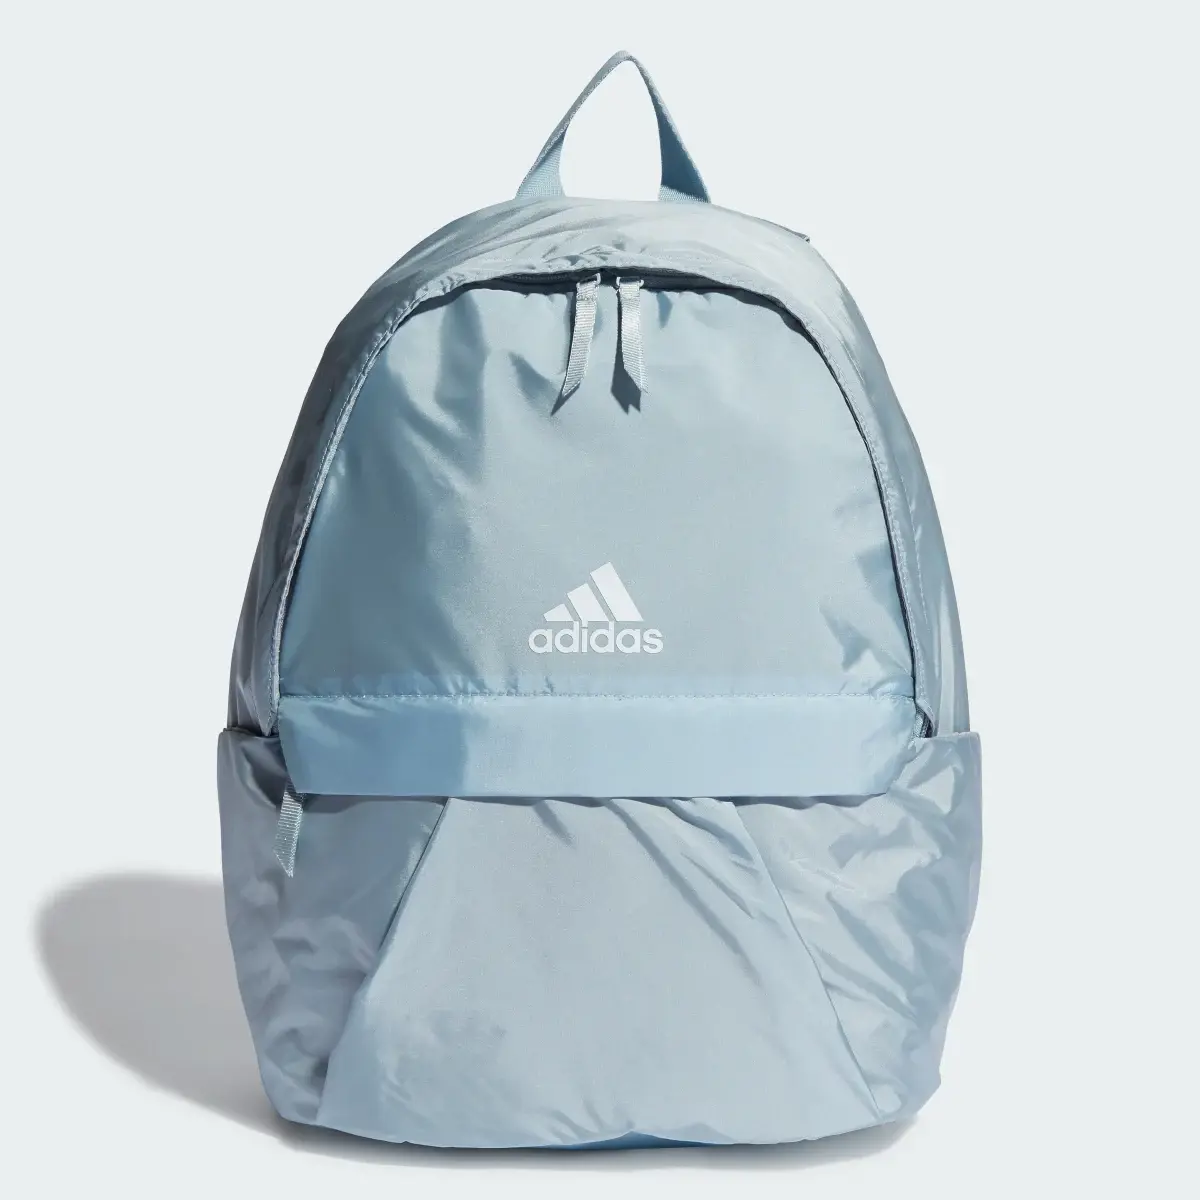 Adidas Classic Gen Z Backpack. 2